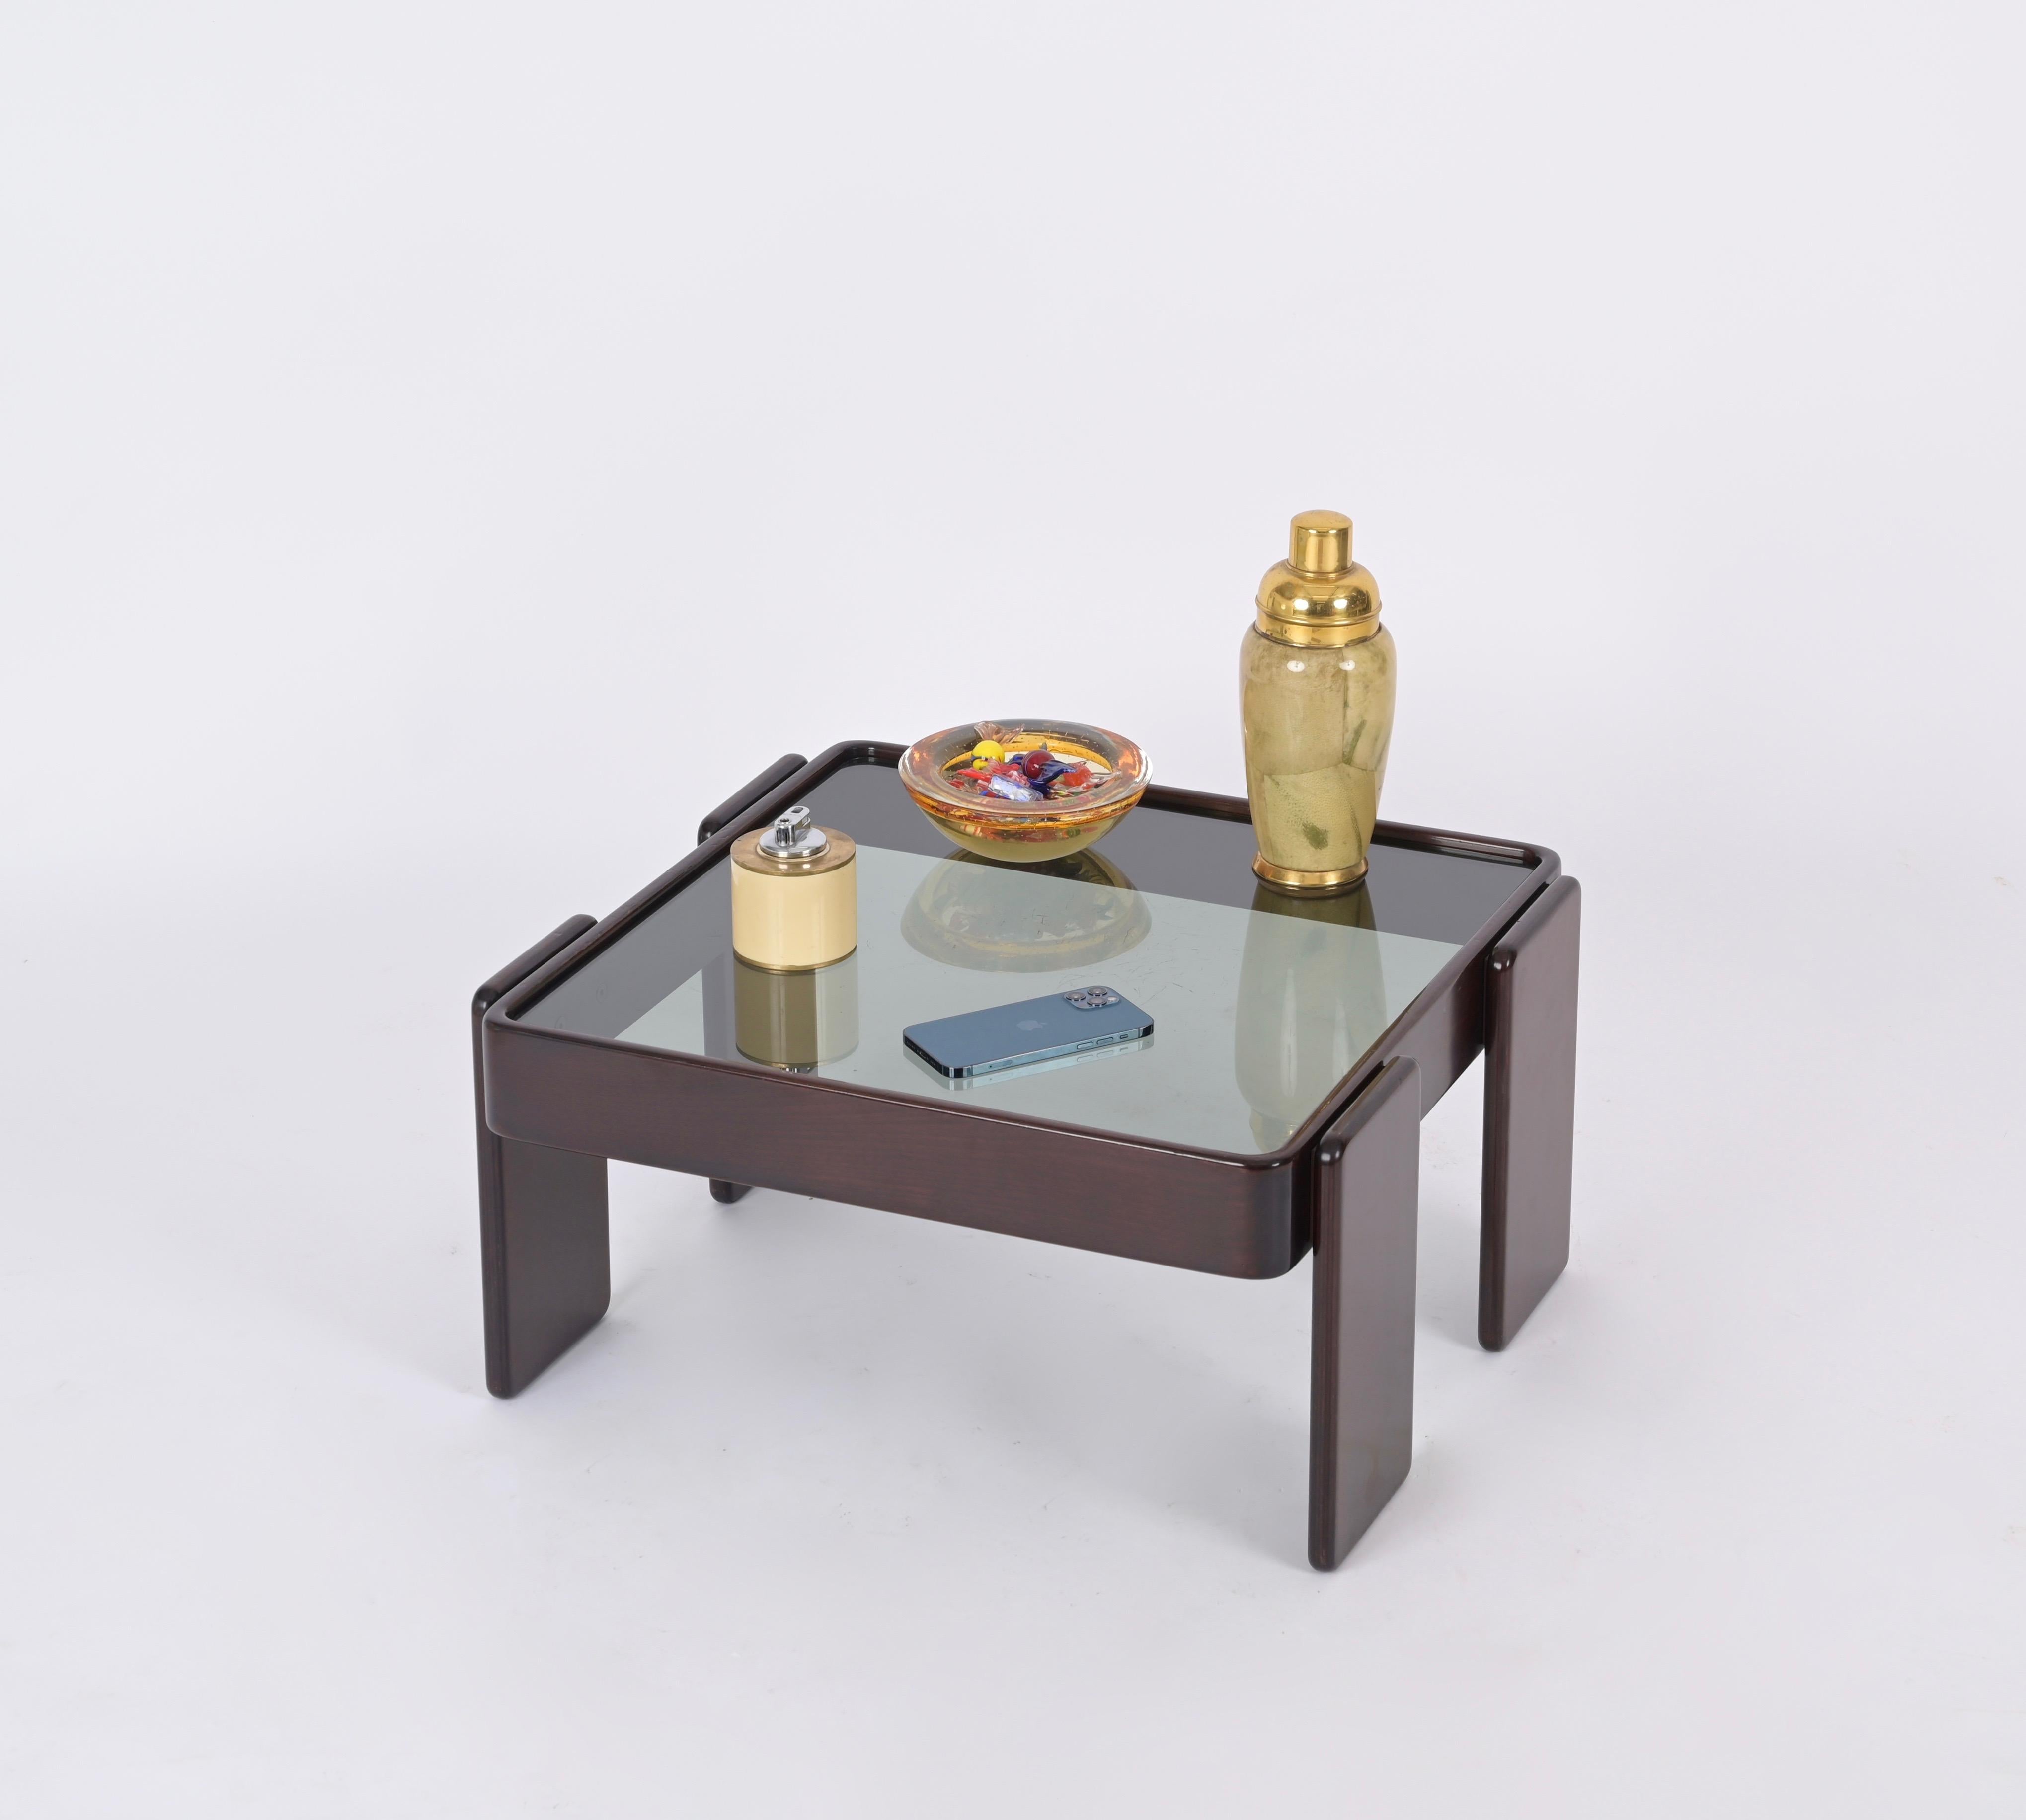 Stunning Mid-Century square coffee table in walnut wood with smoked glass top. This iconic coffee table was designed by Gianfranco Frattini for Cassina, in Italy during the 1970s.  

This stylish coffee table features a minimal structure in an